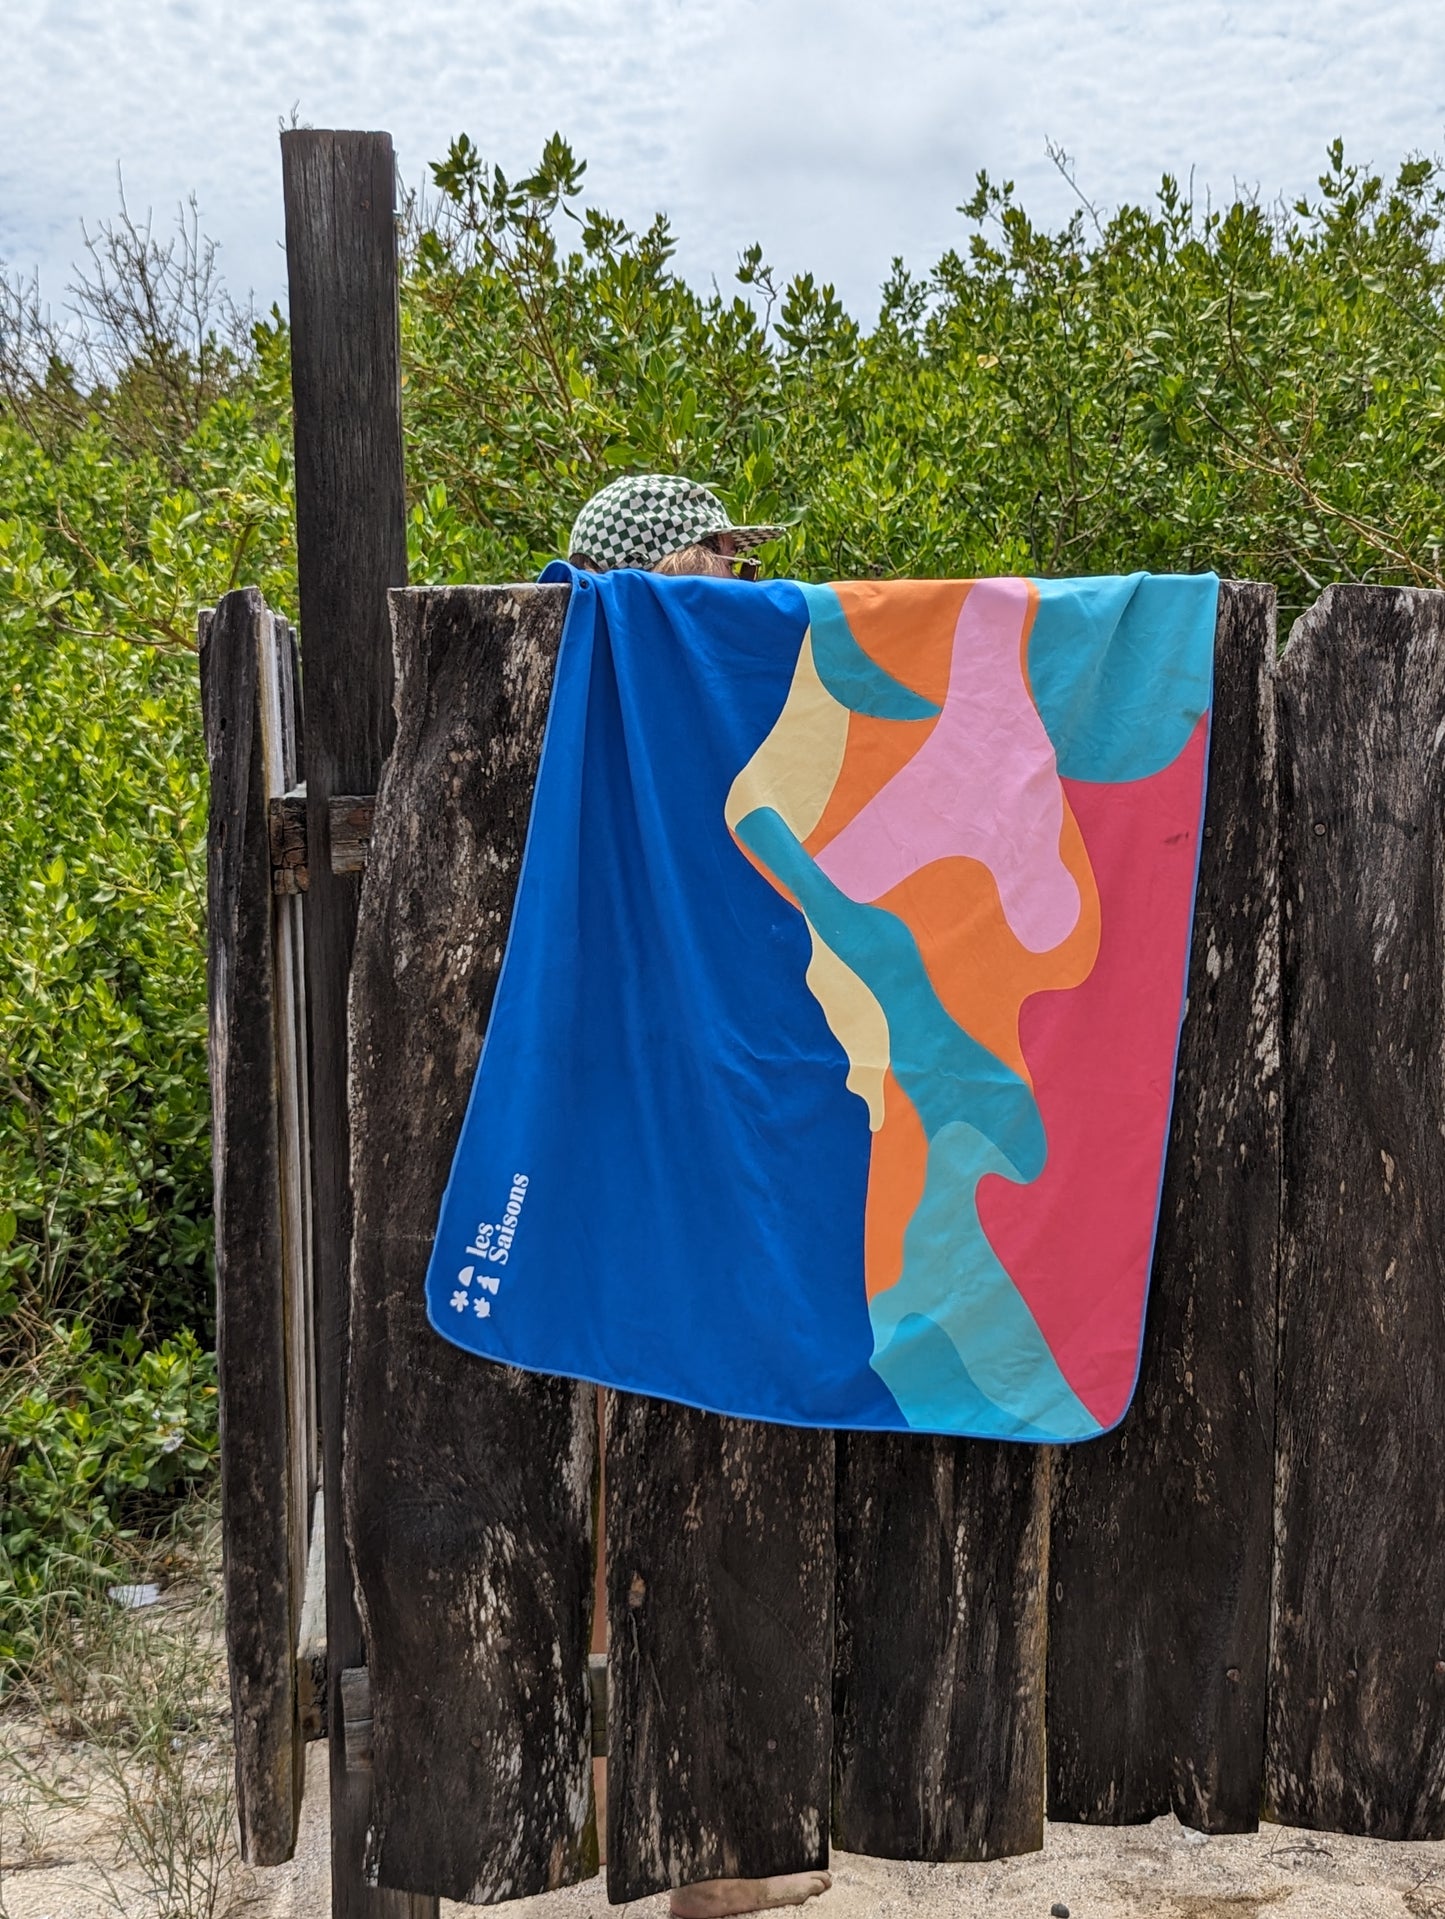 Towel, Antibacterial microfiber, Soft, silky, Compact, lightweight, Vibrant colours and patterns, mountains, made in Québec, 80 x 160 cm, outdoors, hiking, camping, yoga, beach, Les Saisons, Marine Poiraton